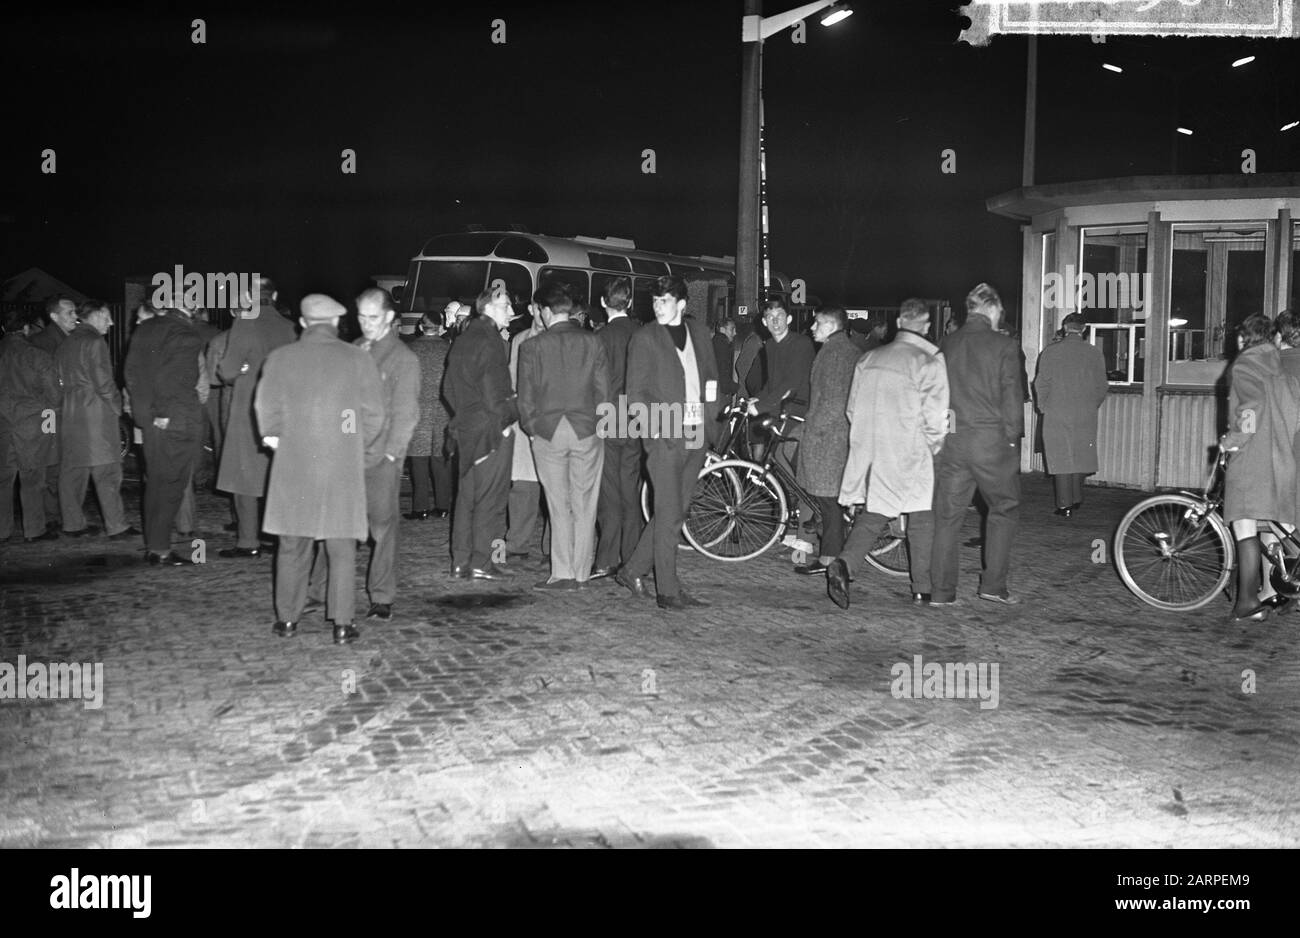 Strike at AKU in Emmen, a group of strikers at the main entrance of the  site Date: April 9, 1965 Location: Emmen Keywords: Strikes Personal name:  AKU Stock Photo - Alamy